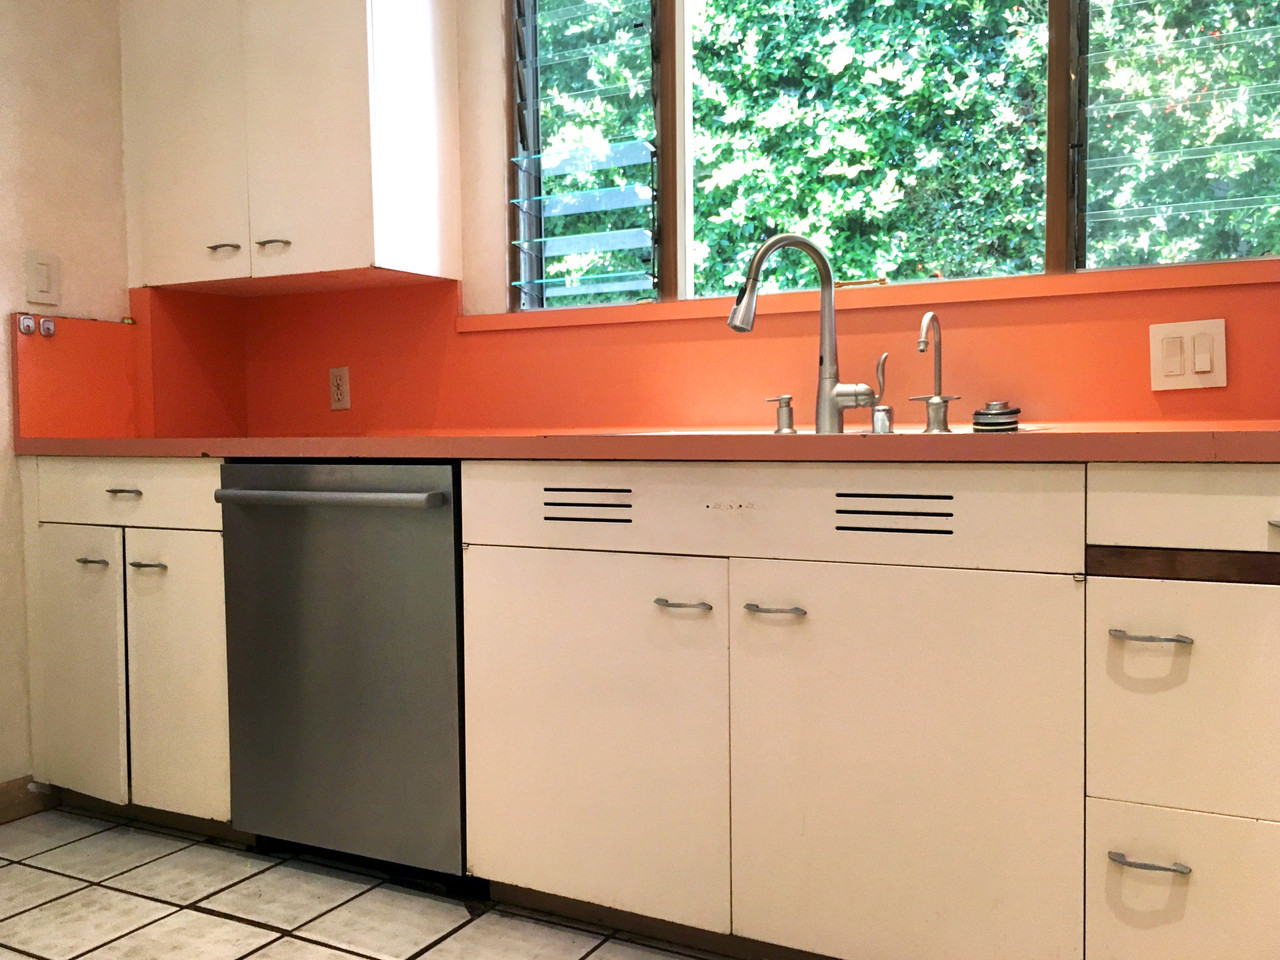 Sold Entire St Charles 1960s Mcm Kitchen And Pantry Rehab